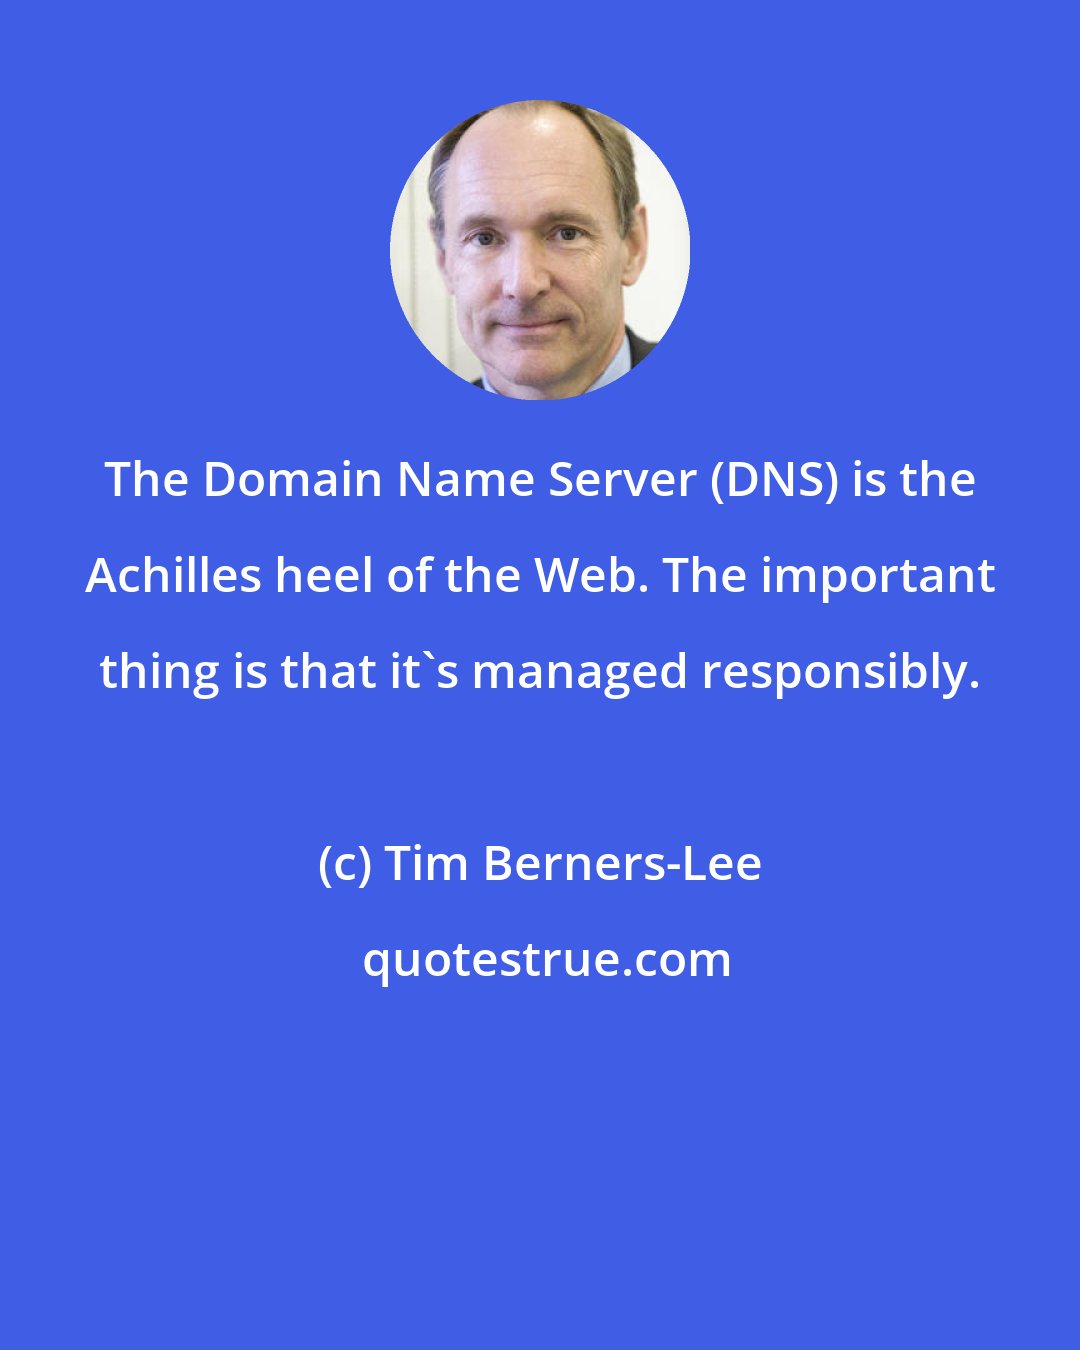 Tim Berners-Lee: The Domain Name Server (DNS) is the Achilles heel of the Web. The important thing is that it's managed responsibly.